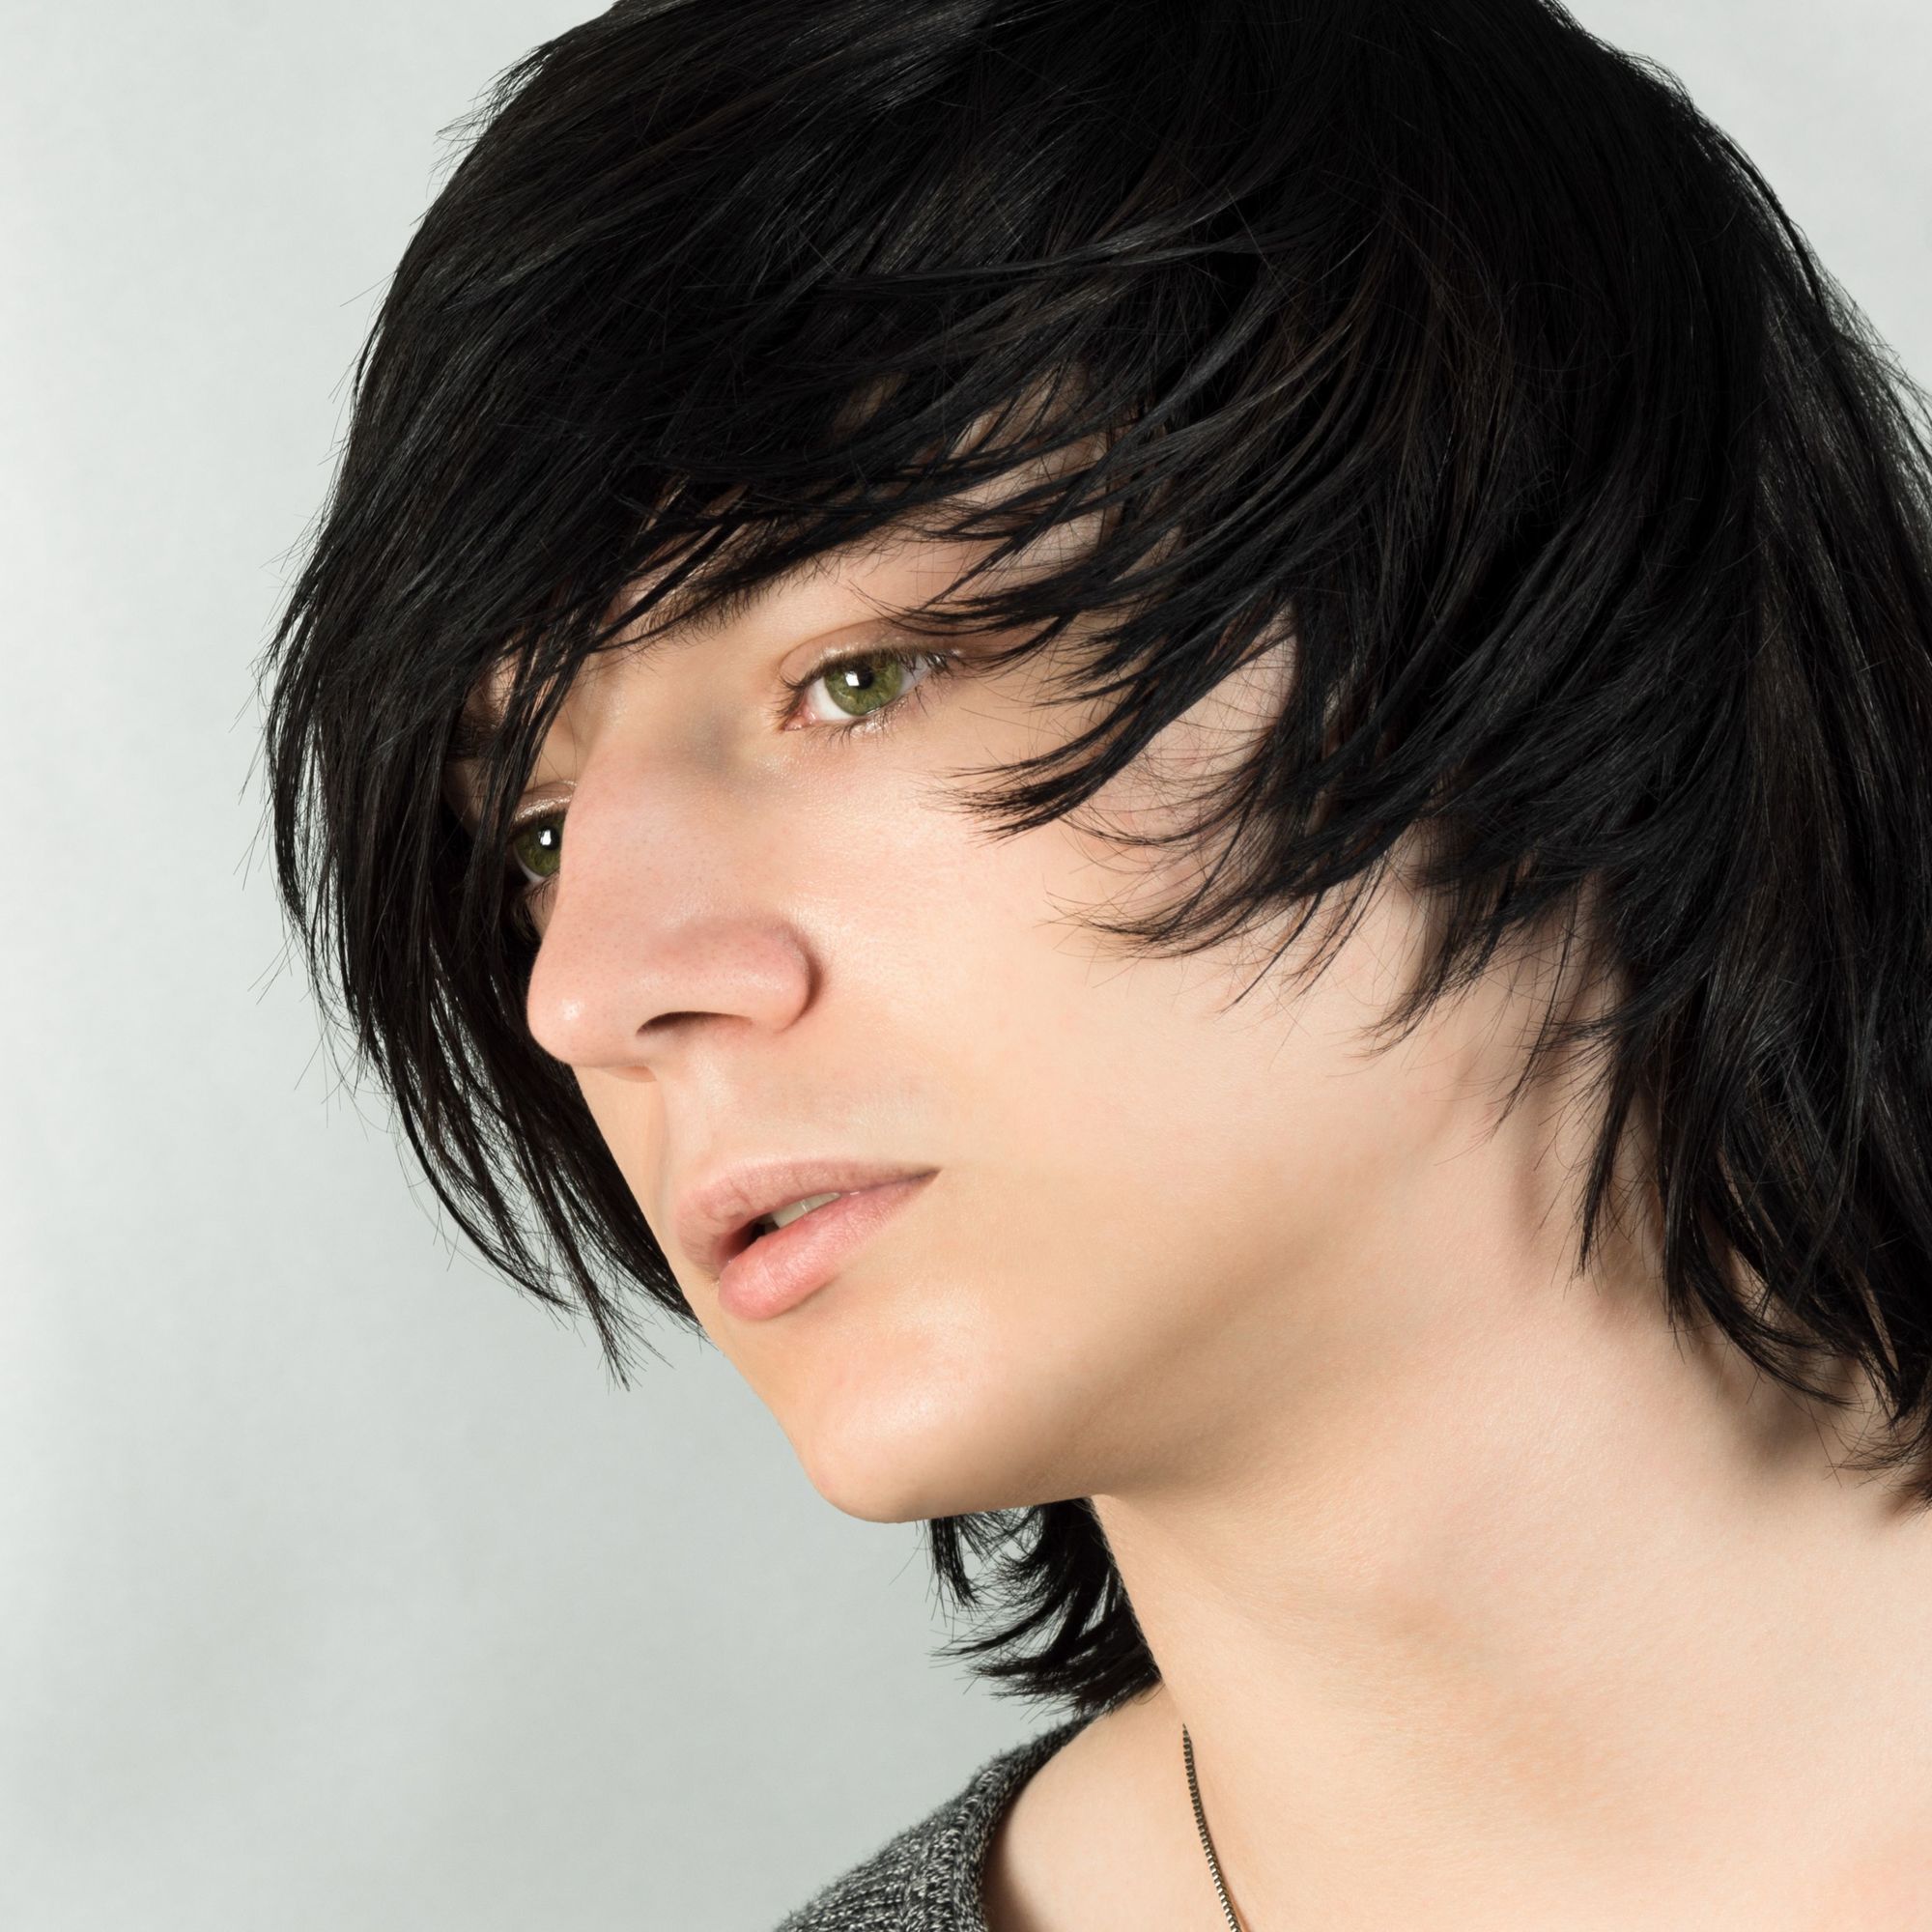 40 Cool Emo Hairstyles For Guys - Creative Ideas | Emo haircuts, Emo  hairstyles for guys, Emo hair